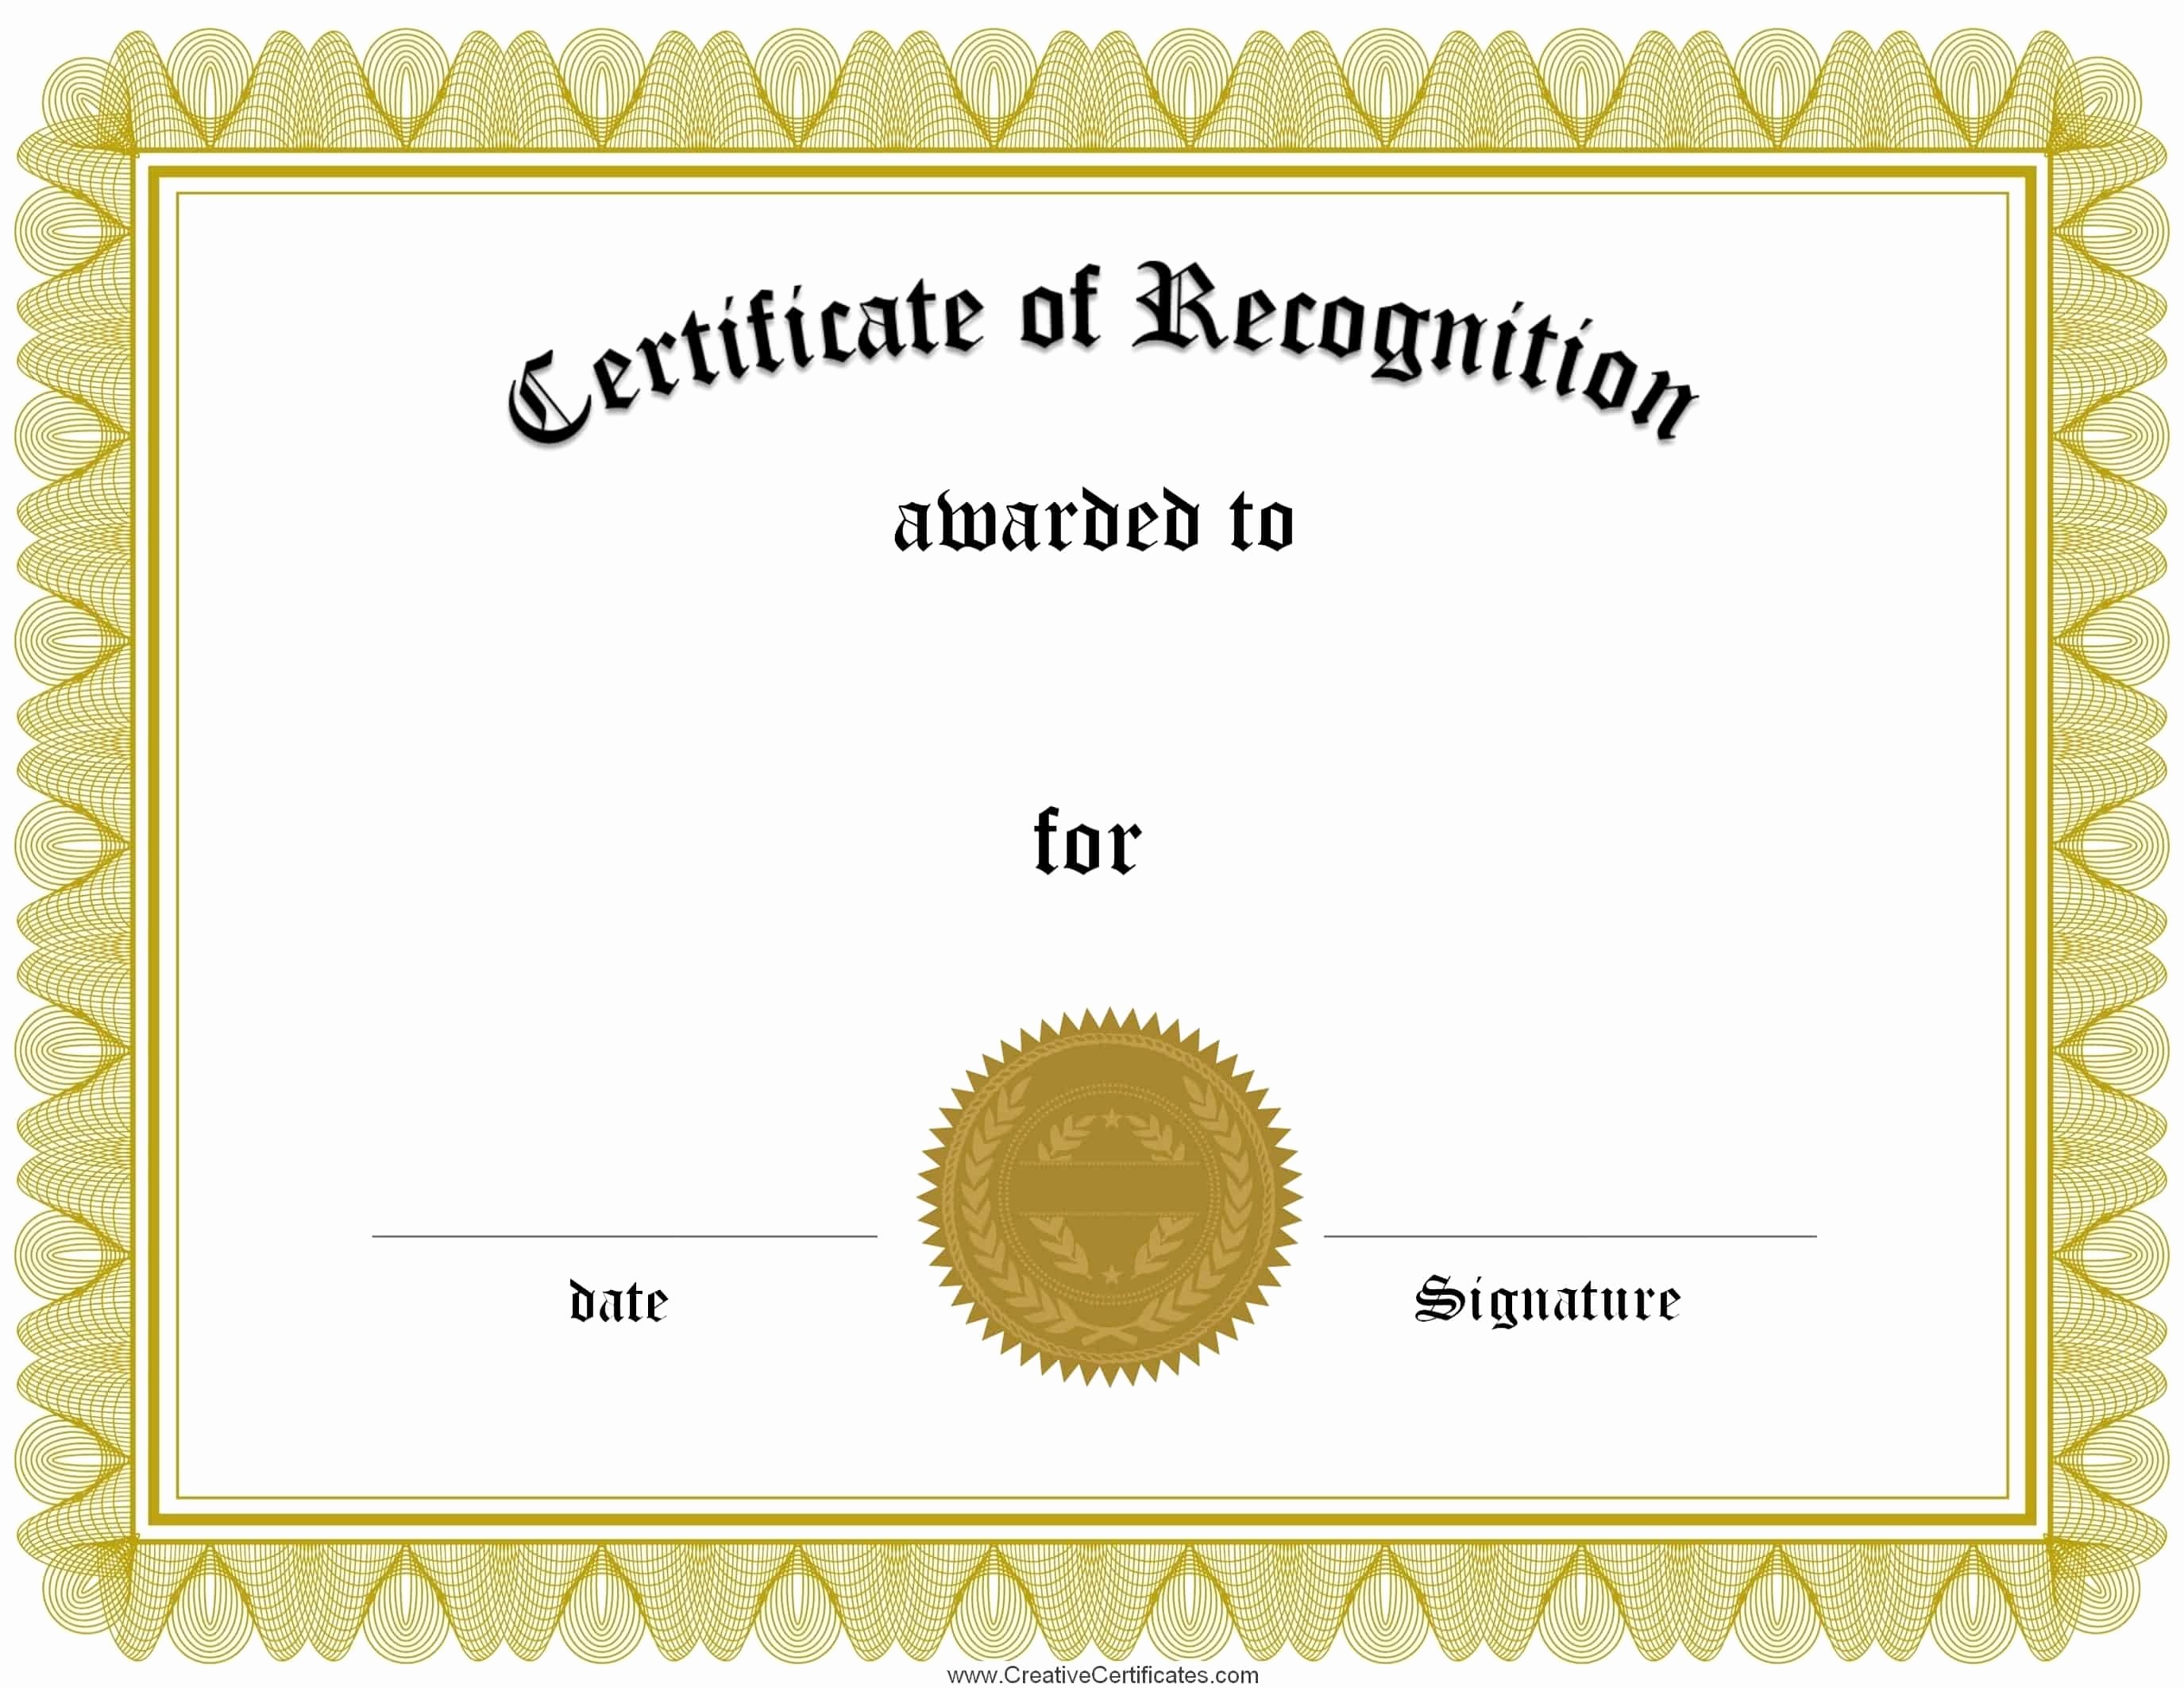 Certificate Of Recognition Editable Template Luxury Free Certificate Of Recognition Template